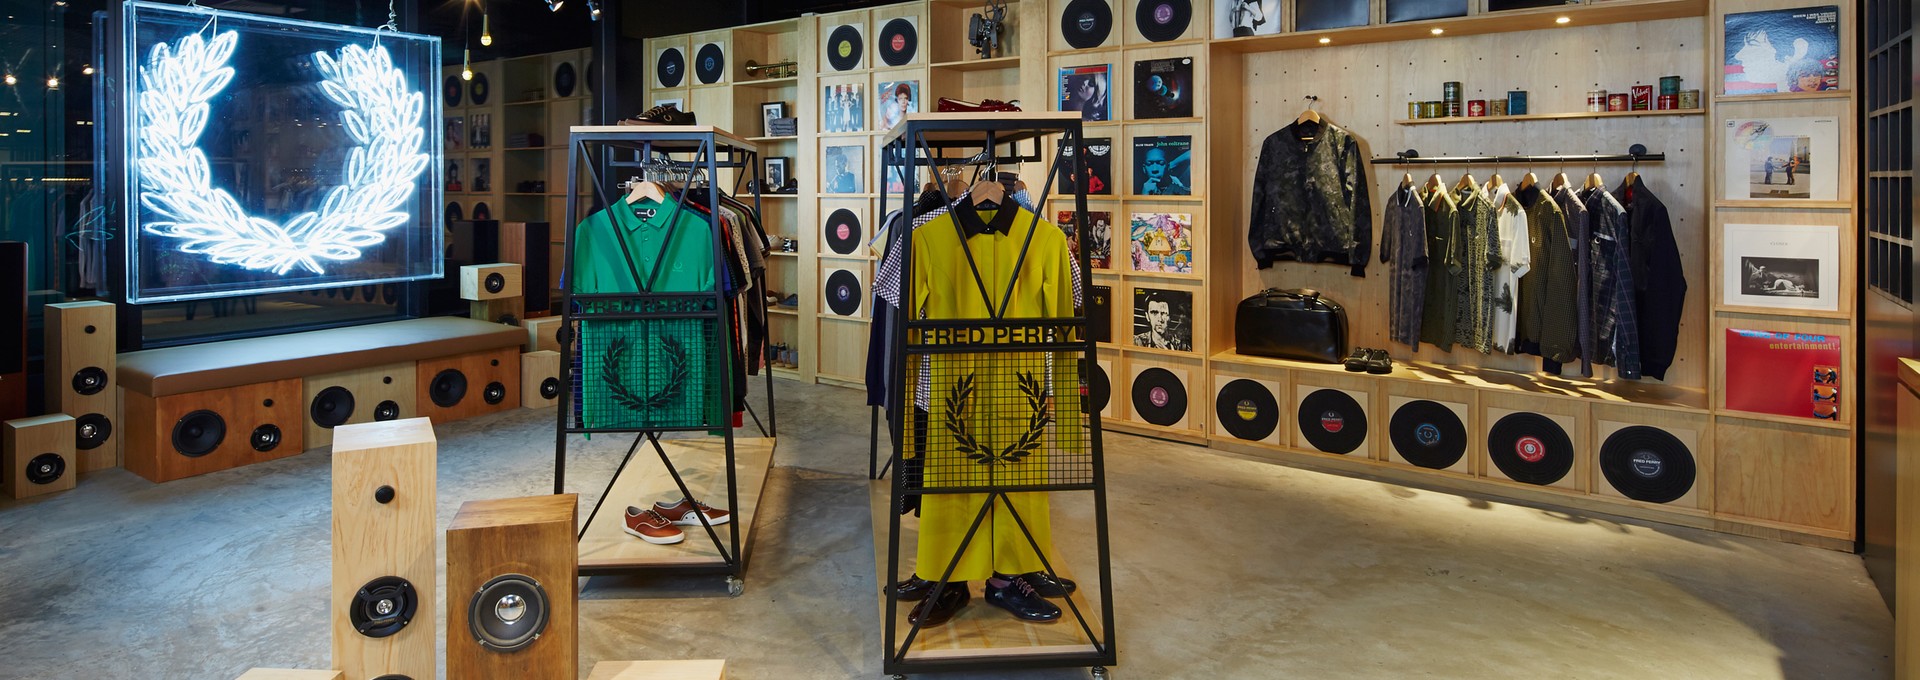 The Fred Perry Laurel Wreath Store in Singapore, designed by Studio Königshausen, pays homage to music and youth culture through its unique design. The exterior resembles a classic English shop front, while the window display resembles a vinyl record store with a Marantz vinyl player. Inside, a neon Laurel Wreath logo illuminates the space, and modular product walls house vinyl records alongside Fred Perry products for a distinct retail experience.